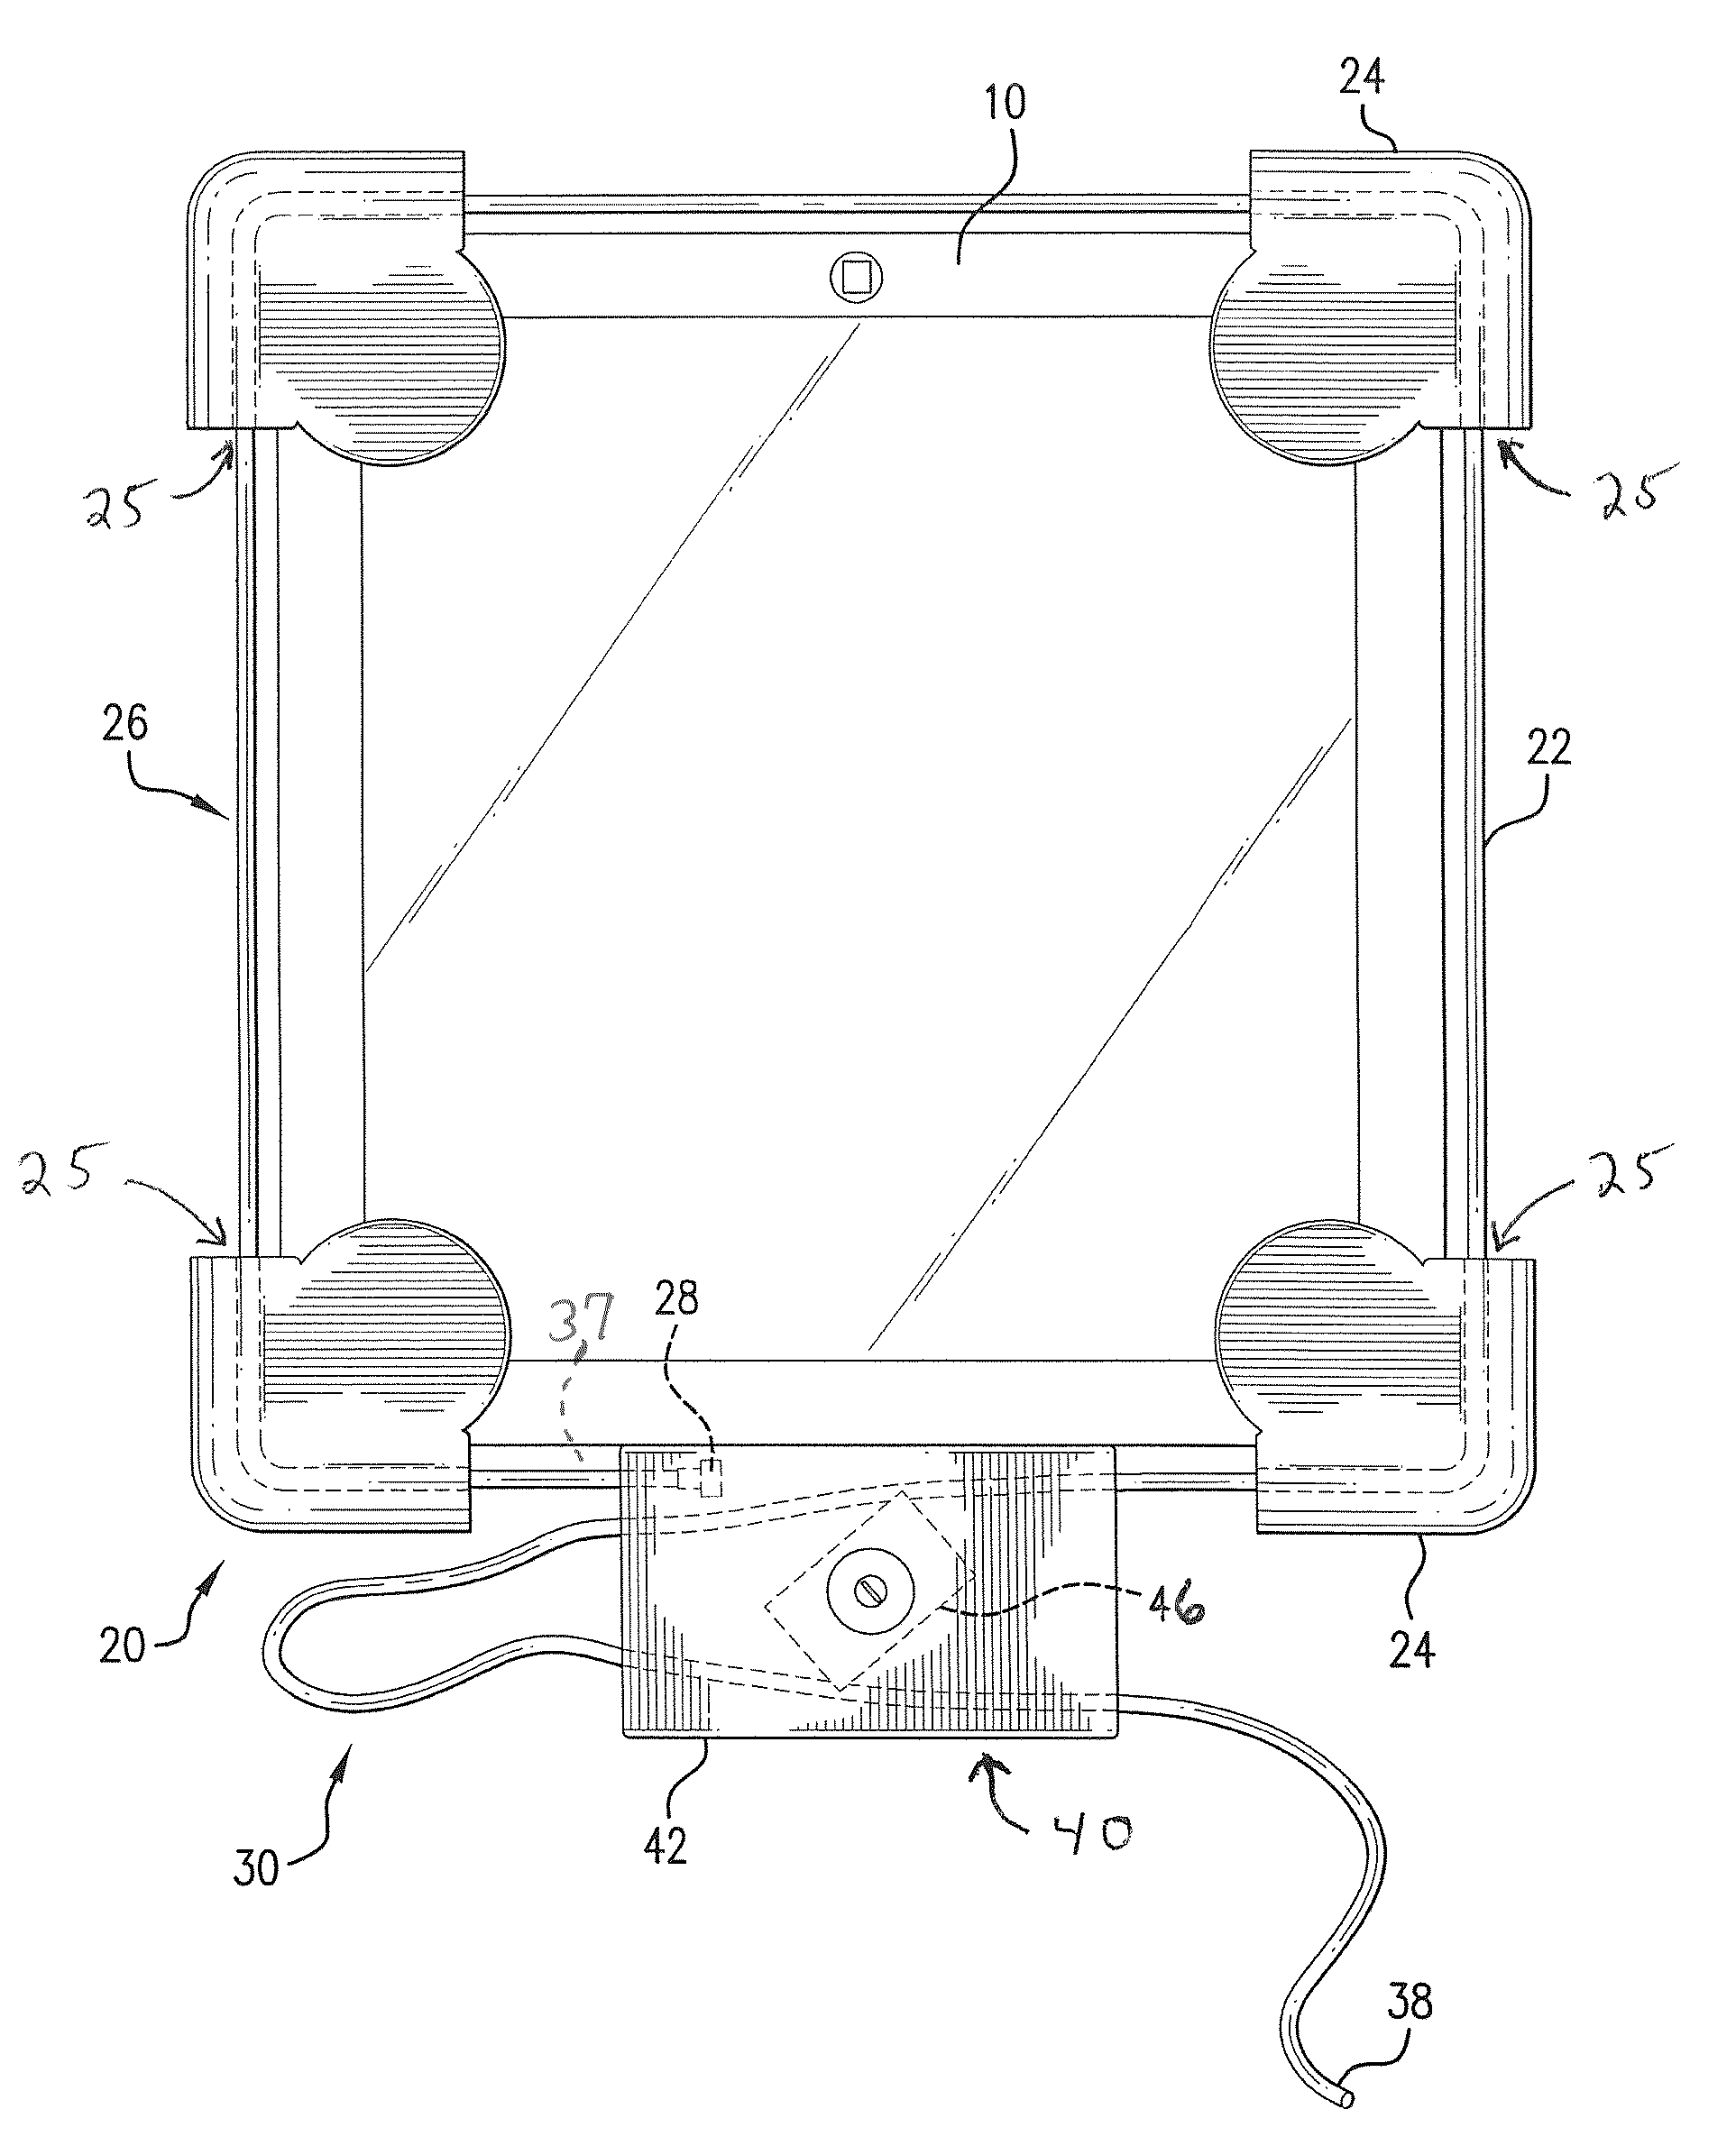 Theft prevention apparatus for a personal electronic device